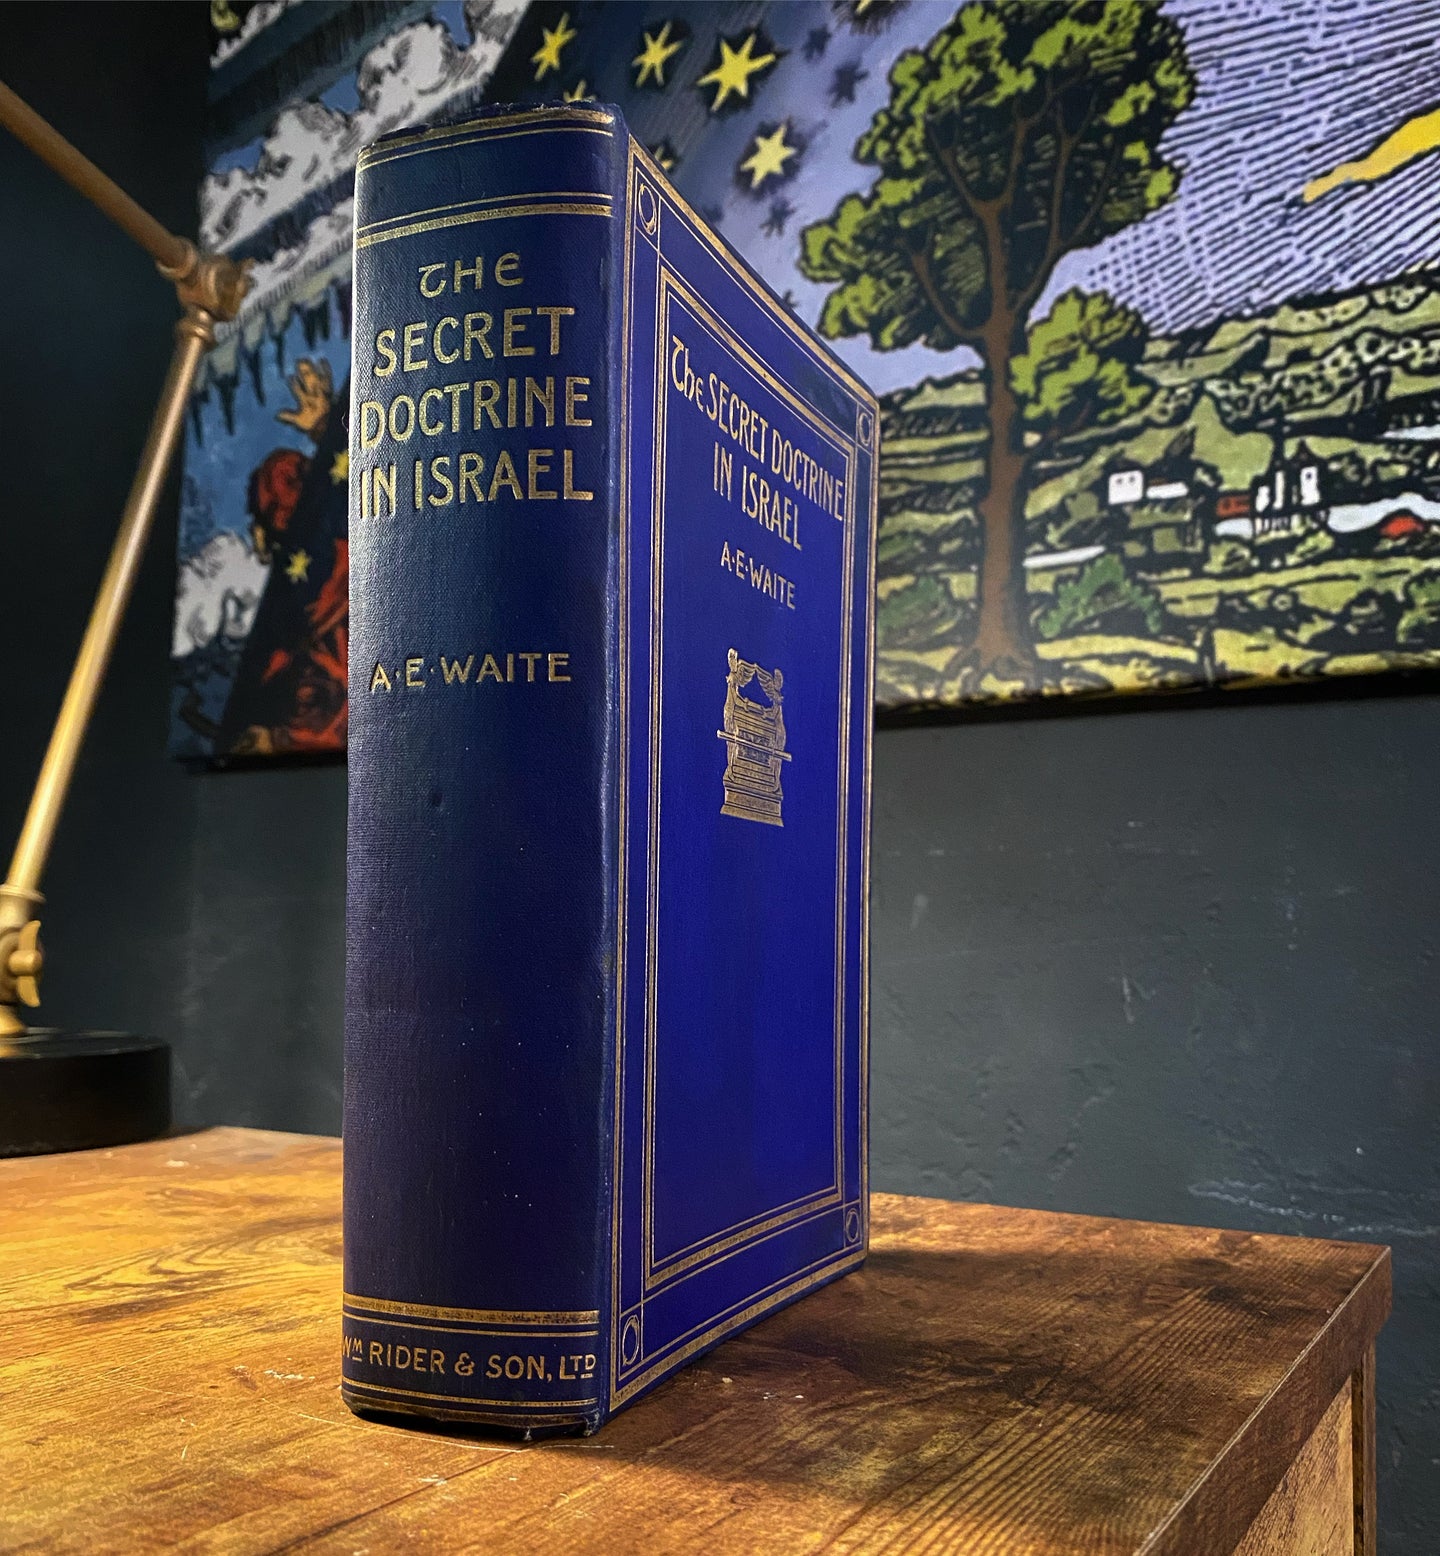 The Secret Doctrine in Israel by A.E. Waite